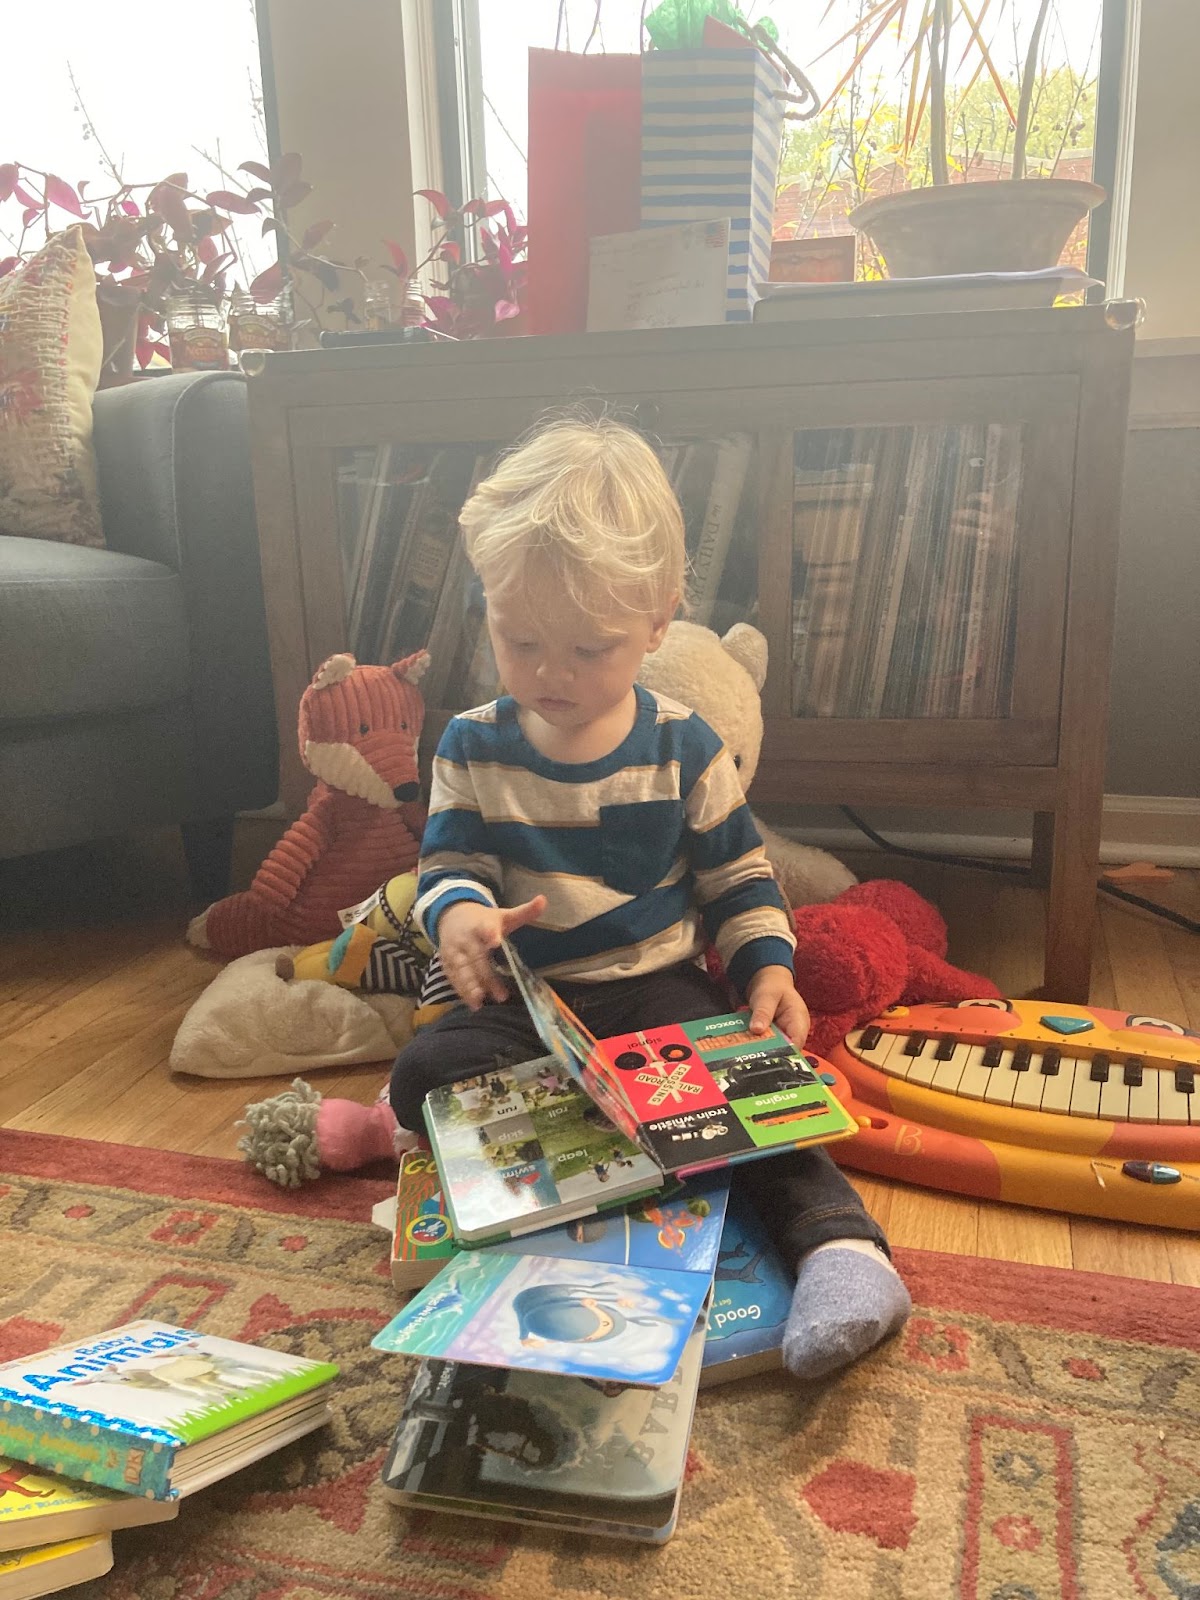 A picture of a young toddler reading a picture book.